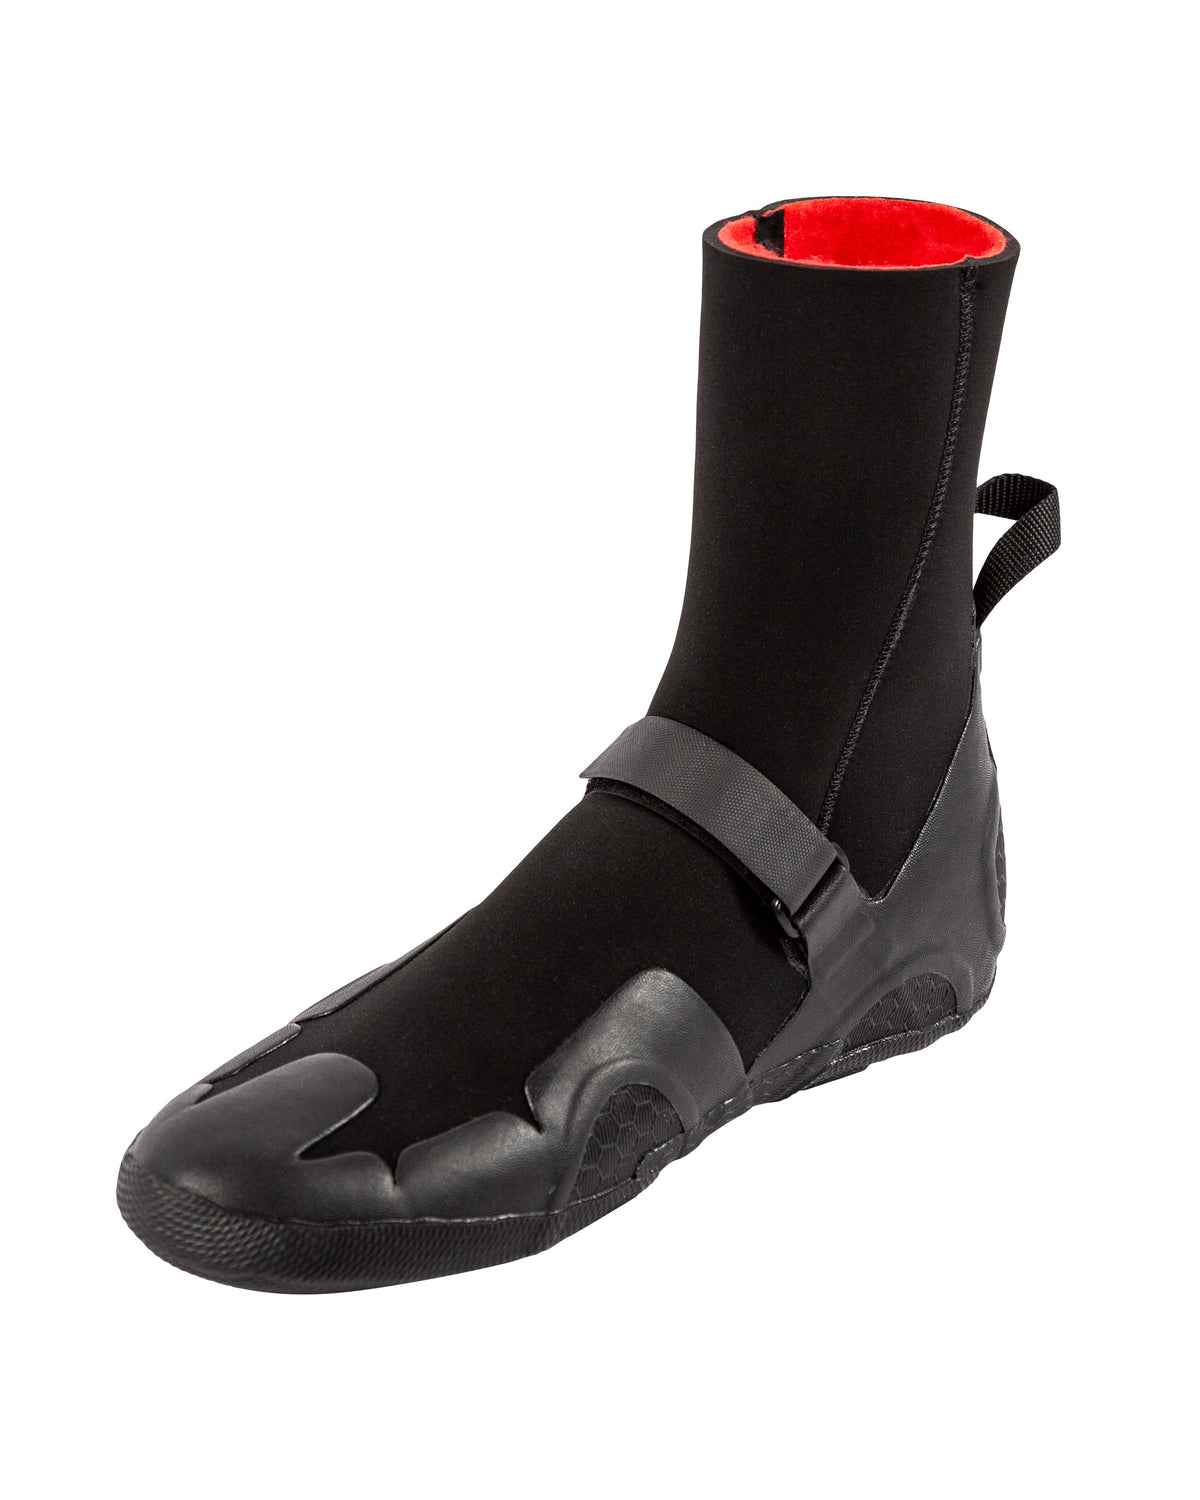 5mm Red Cell Bootie - Black - Body Glove